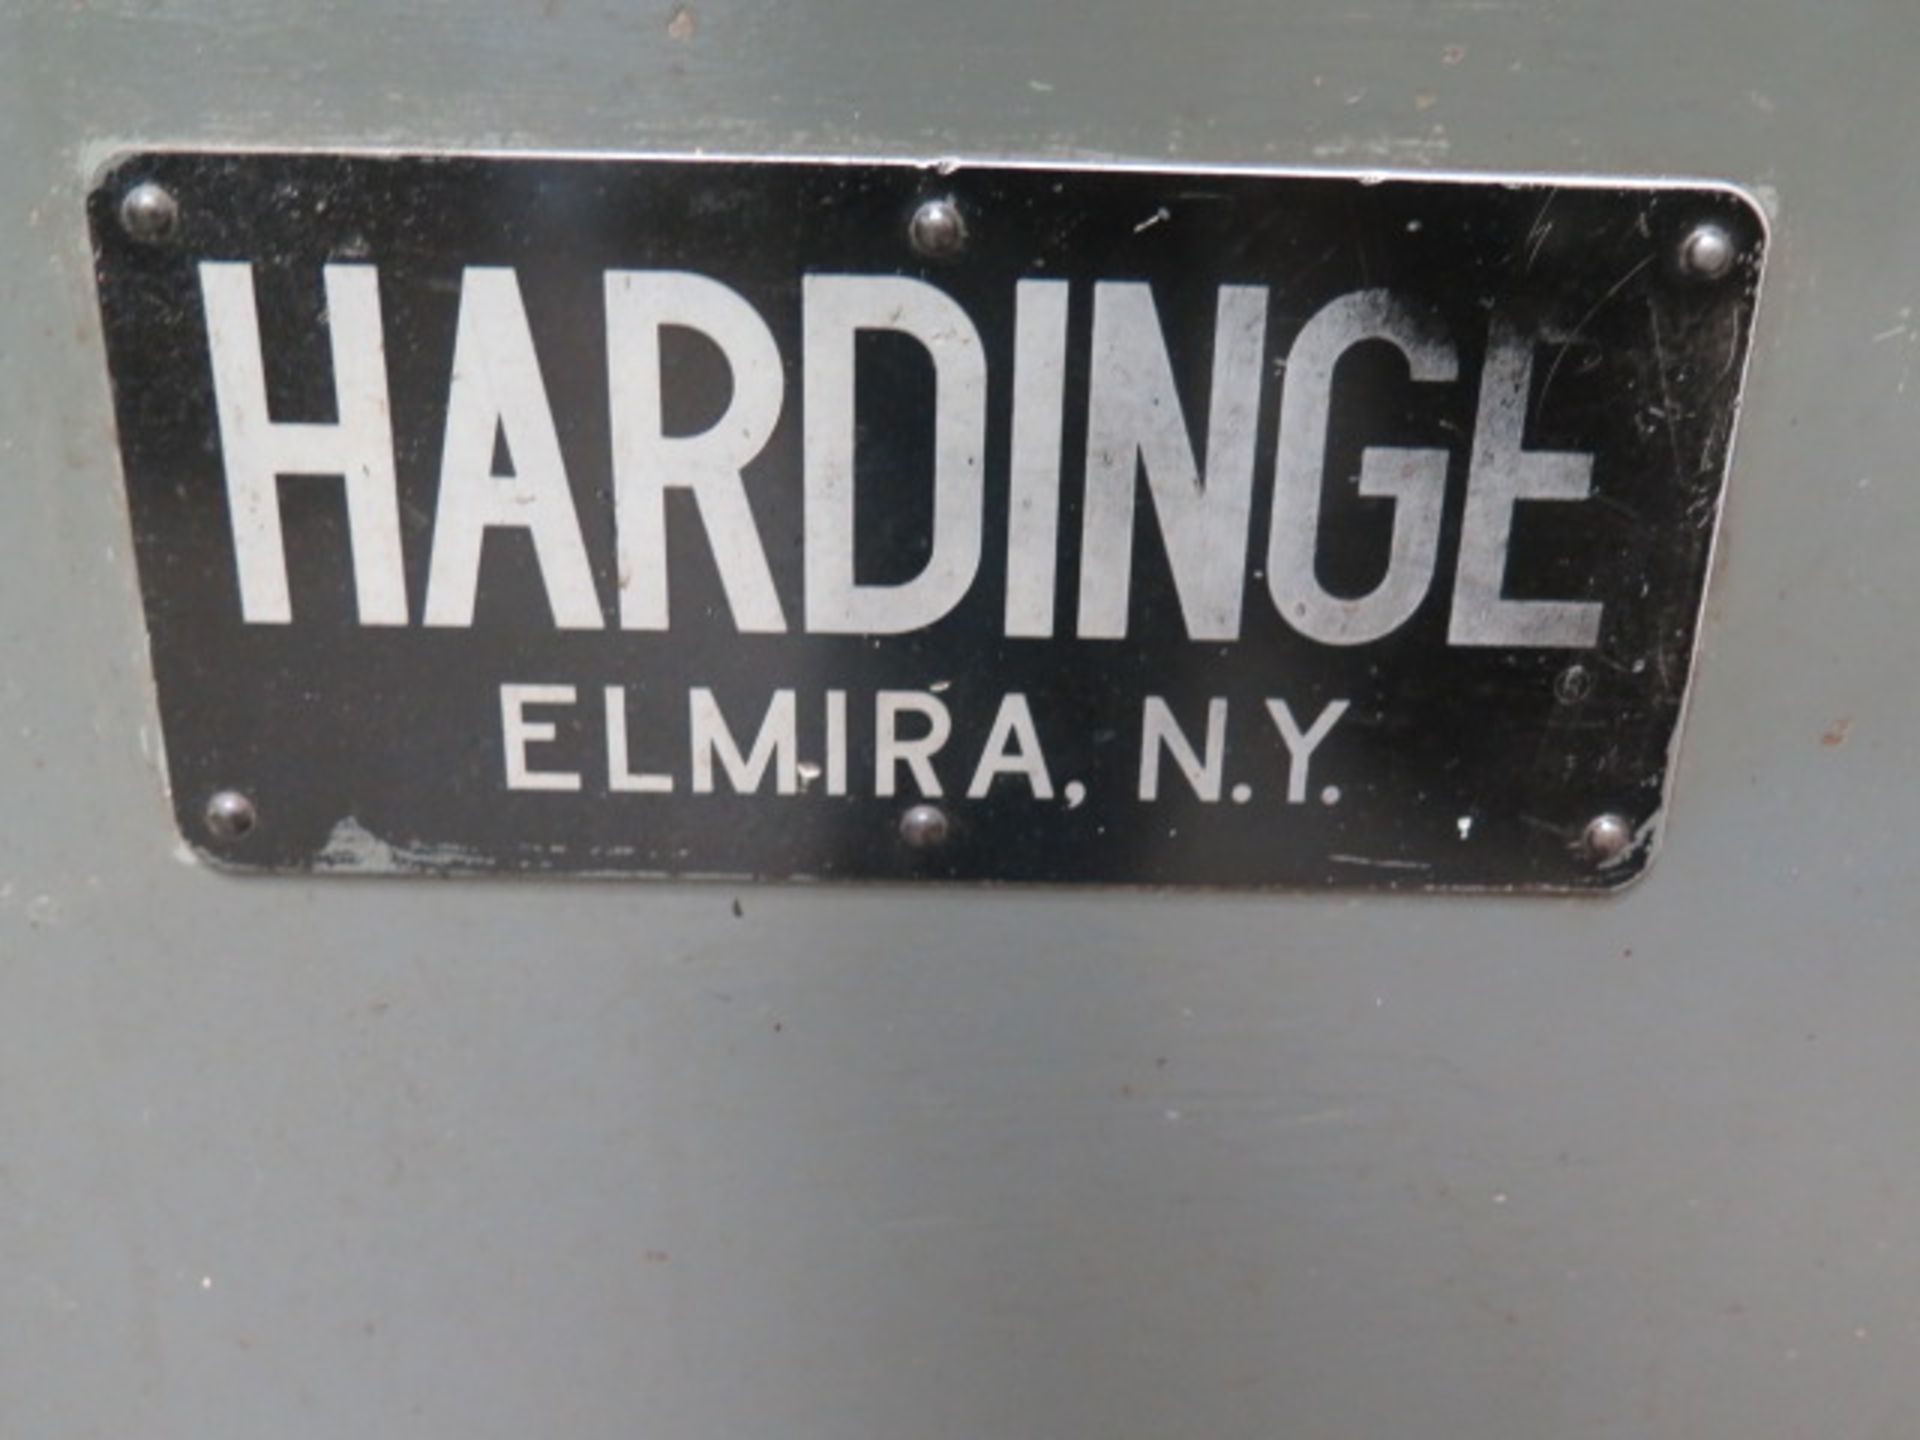 Hardinge DV-59 Narrow Bed Second OP Lathe s/n DV-59-12187 w/ 250-2600 RPM, 5C Spindle, Compound - Image 7 of 8